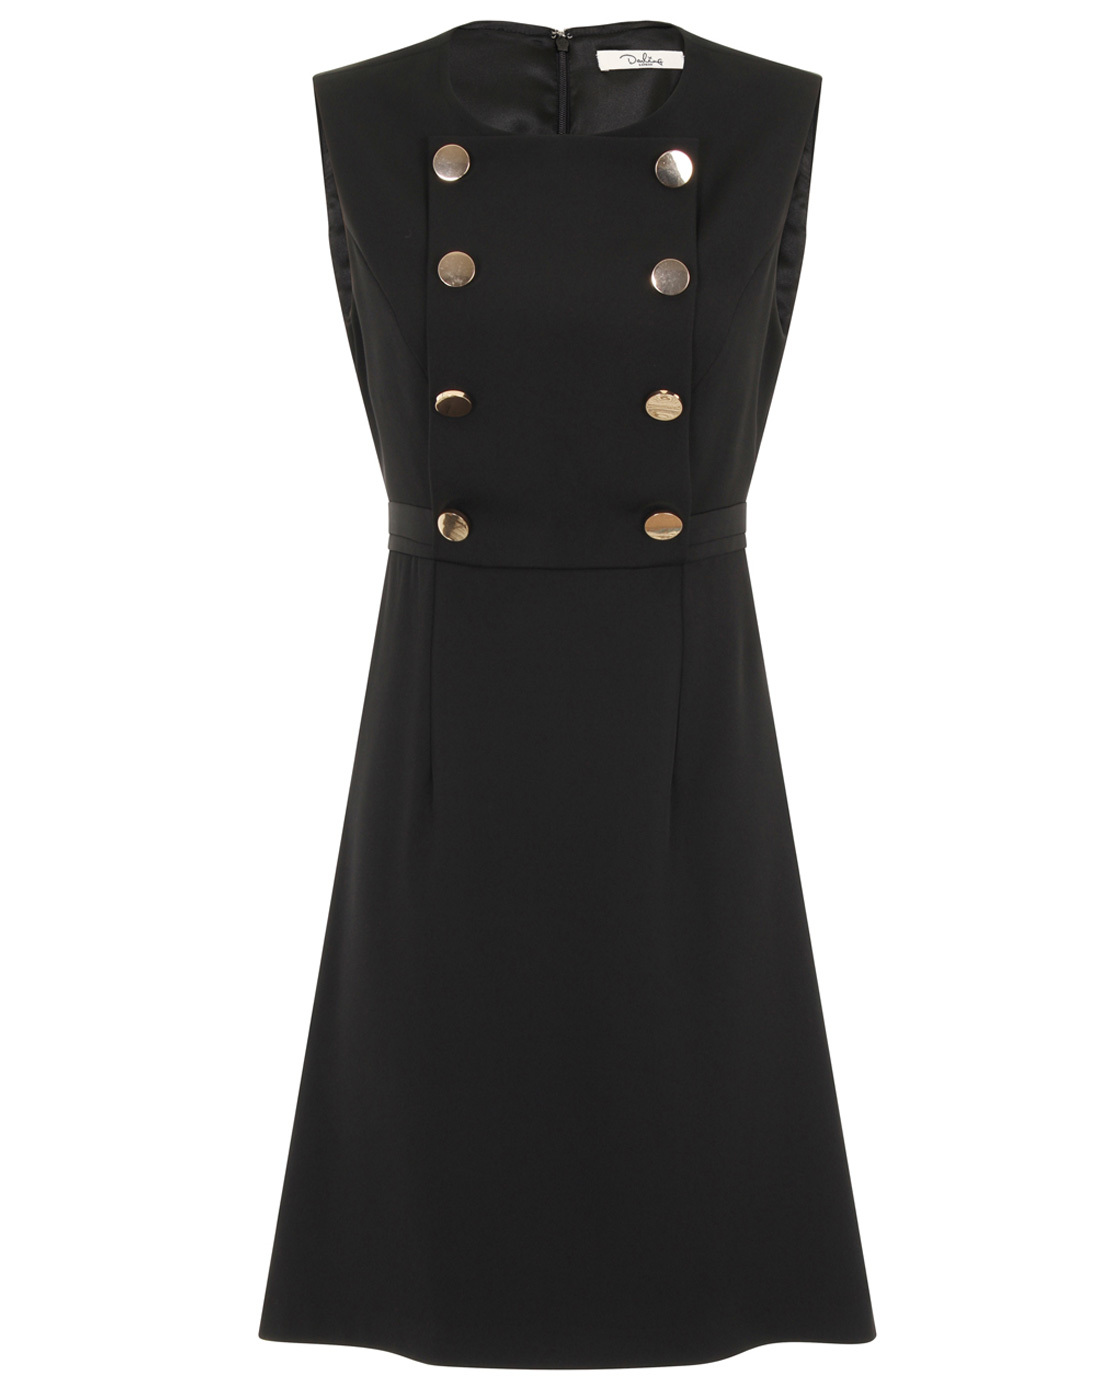 DARLING Langley Retro Sixties Mod Womens Fitted Dress in Black